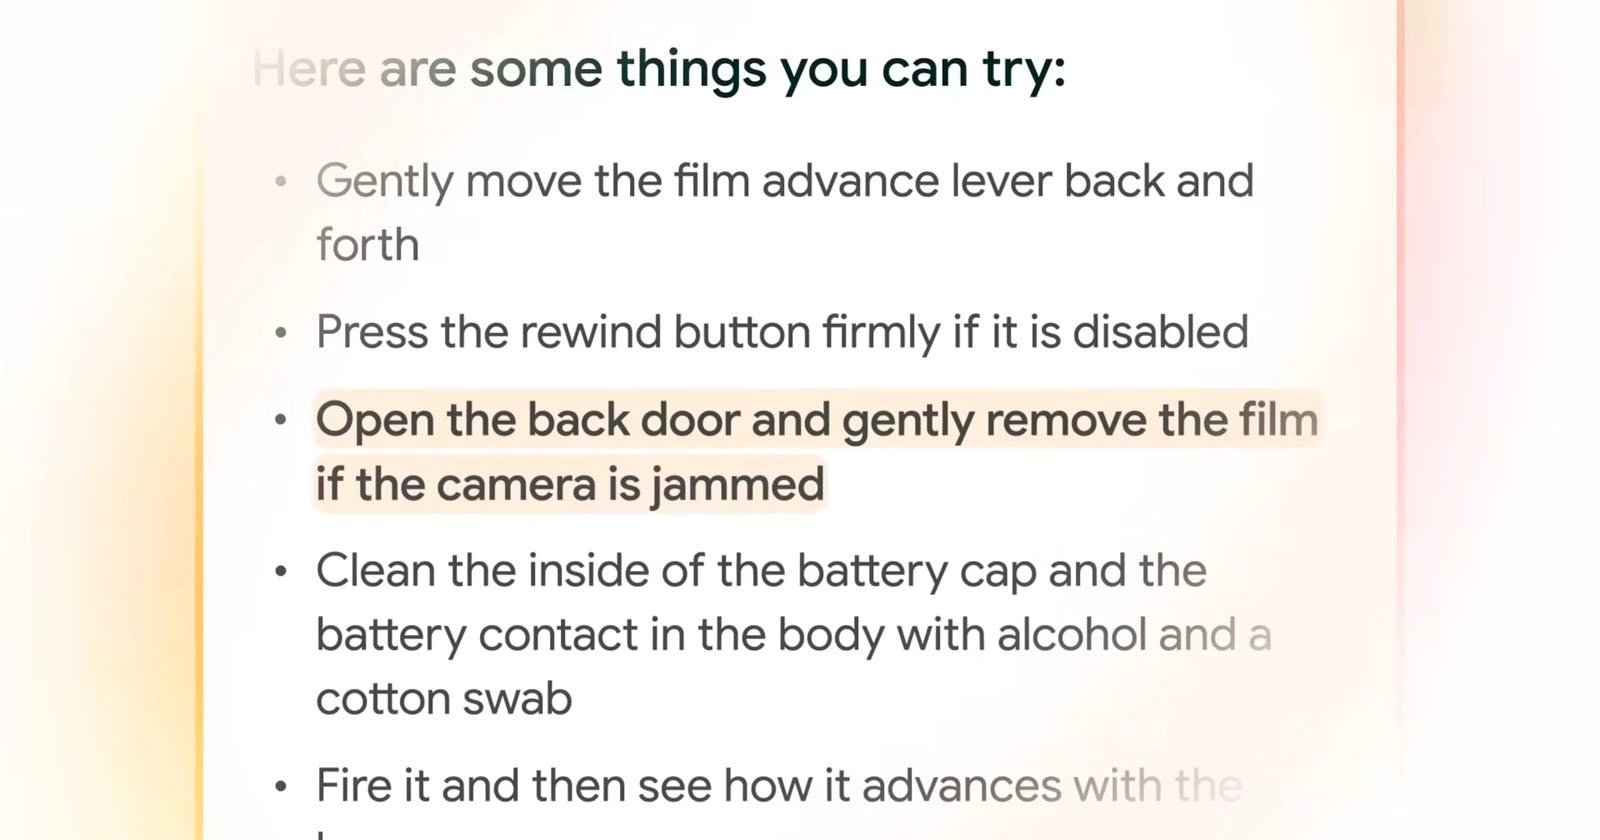 An instructional list on troubleshooting a camera. Steps include moving the film advance lever, pressing the rewind button, opening the back door to remove the film if jammed, cleaning the battery cap and contact with alcohol and a swab, and firing the camera.